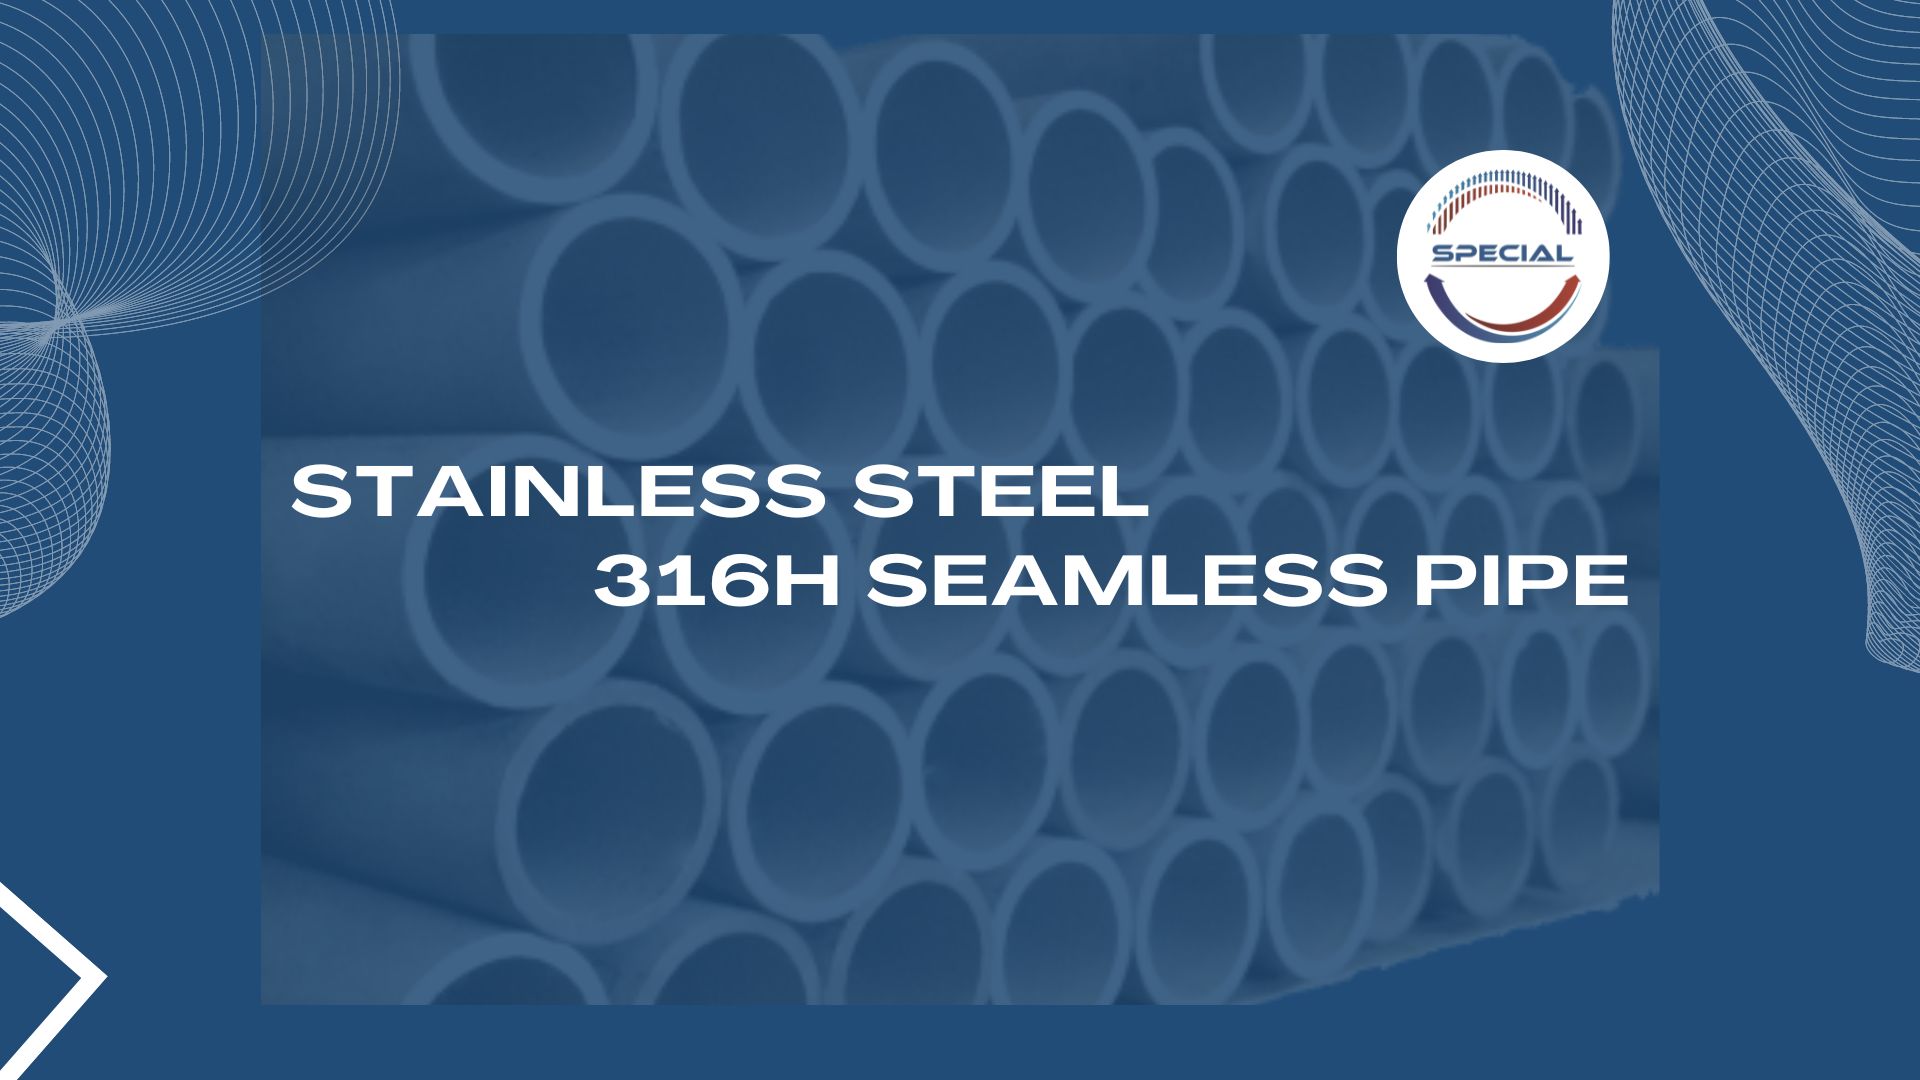 Stainless Steel 316H Seamless Pipe